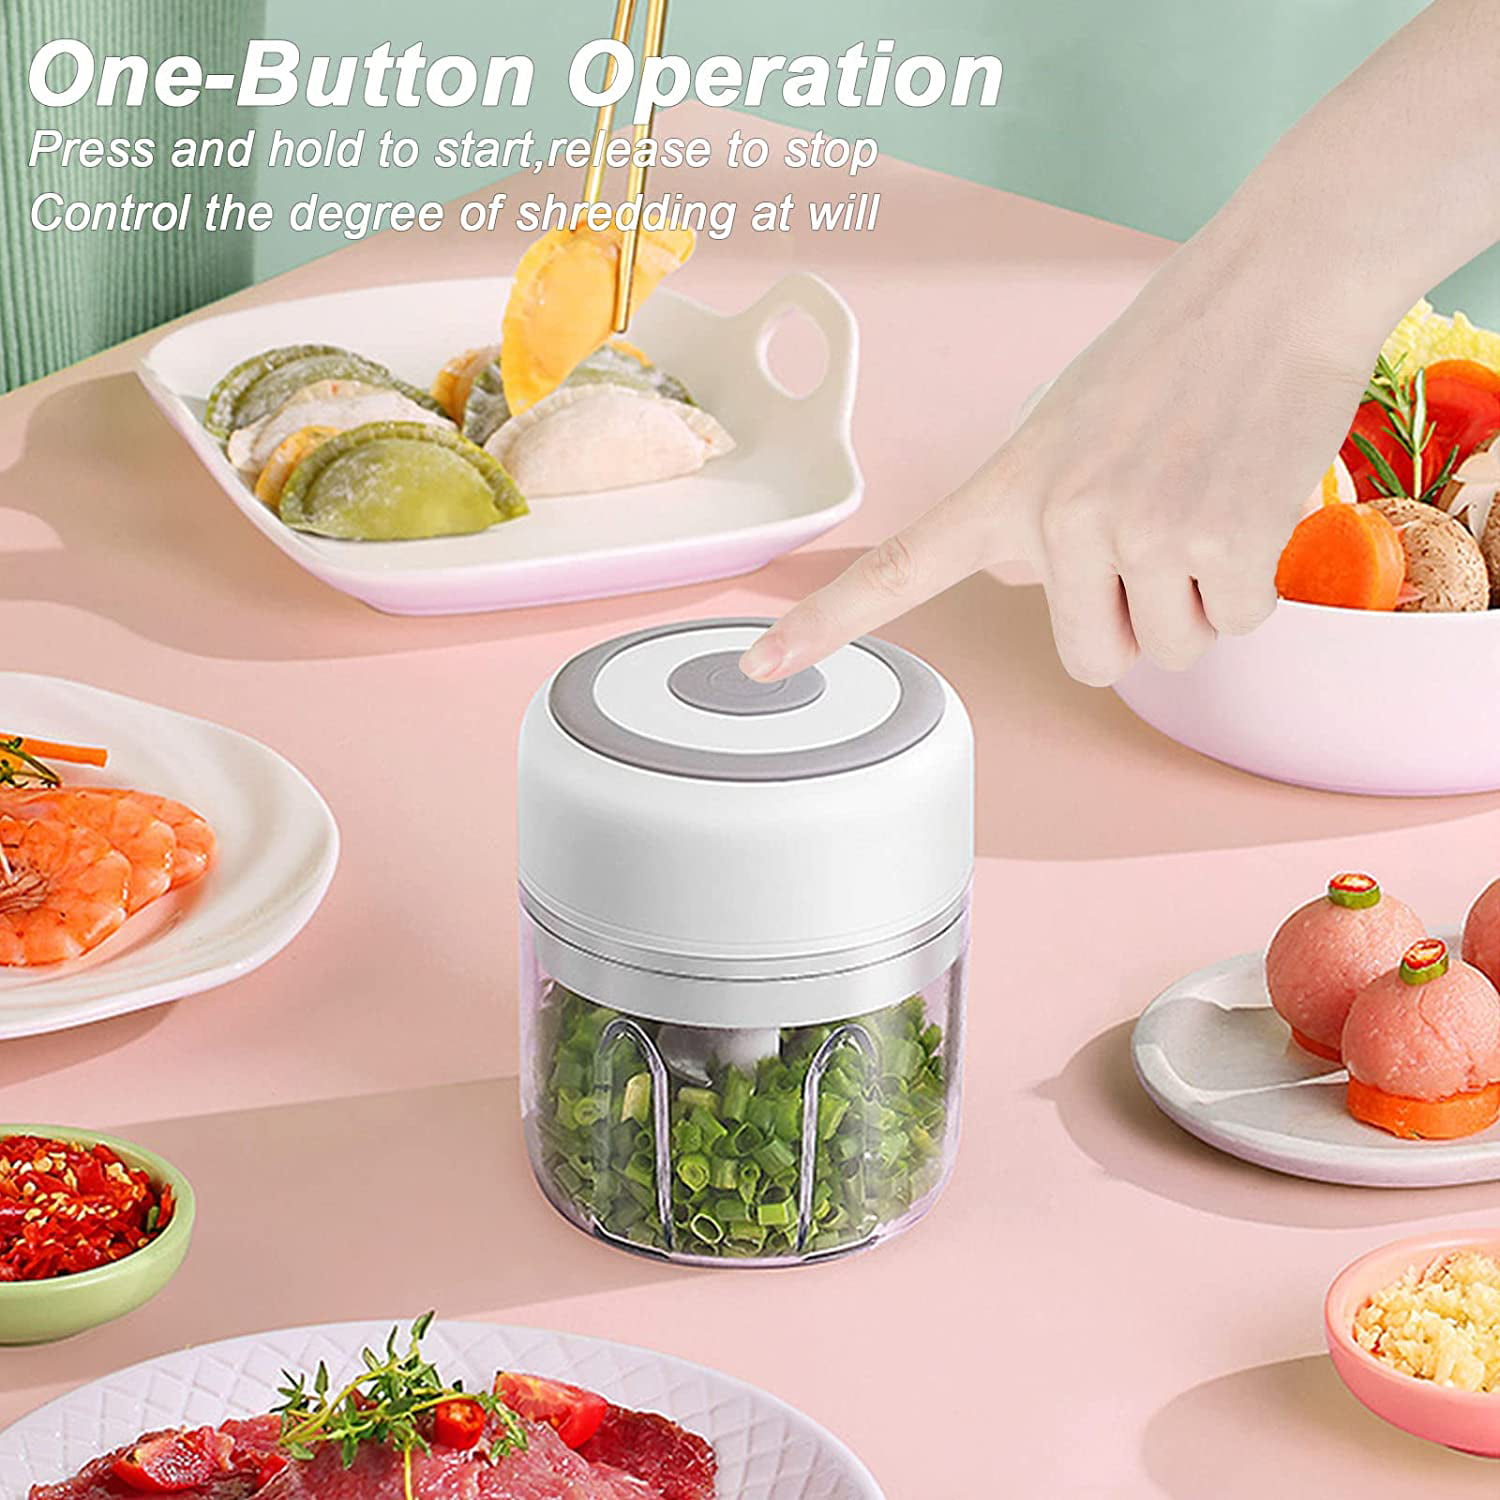 Topboutique Electric Mini Garlic Chopper,Electric Food Processor with USB Charging,Portable Garlic Mincer Vegetable Onion Meat Chopper with Brush